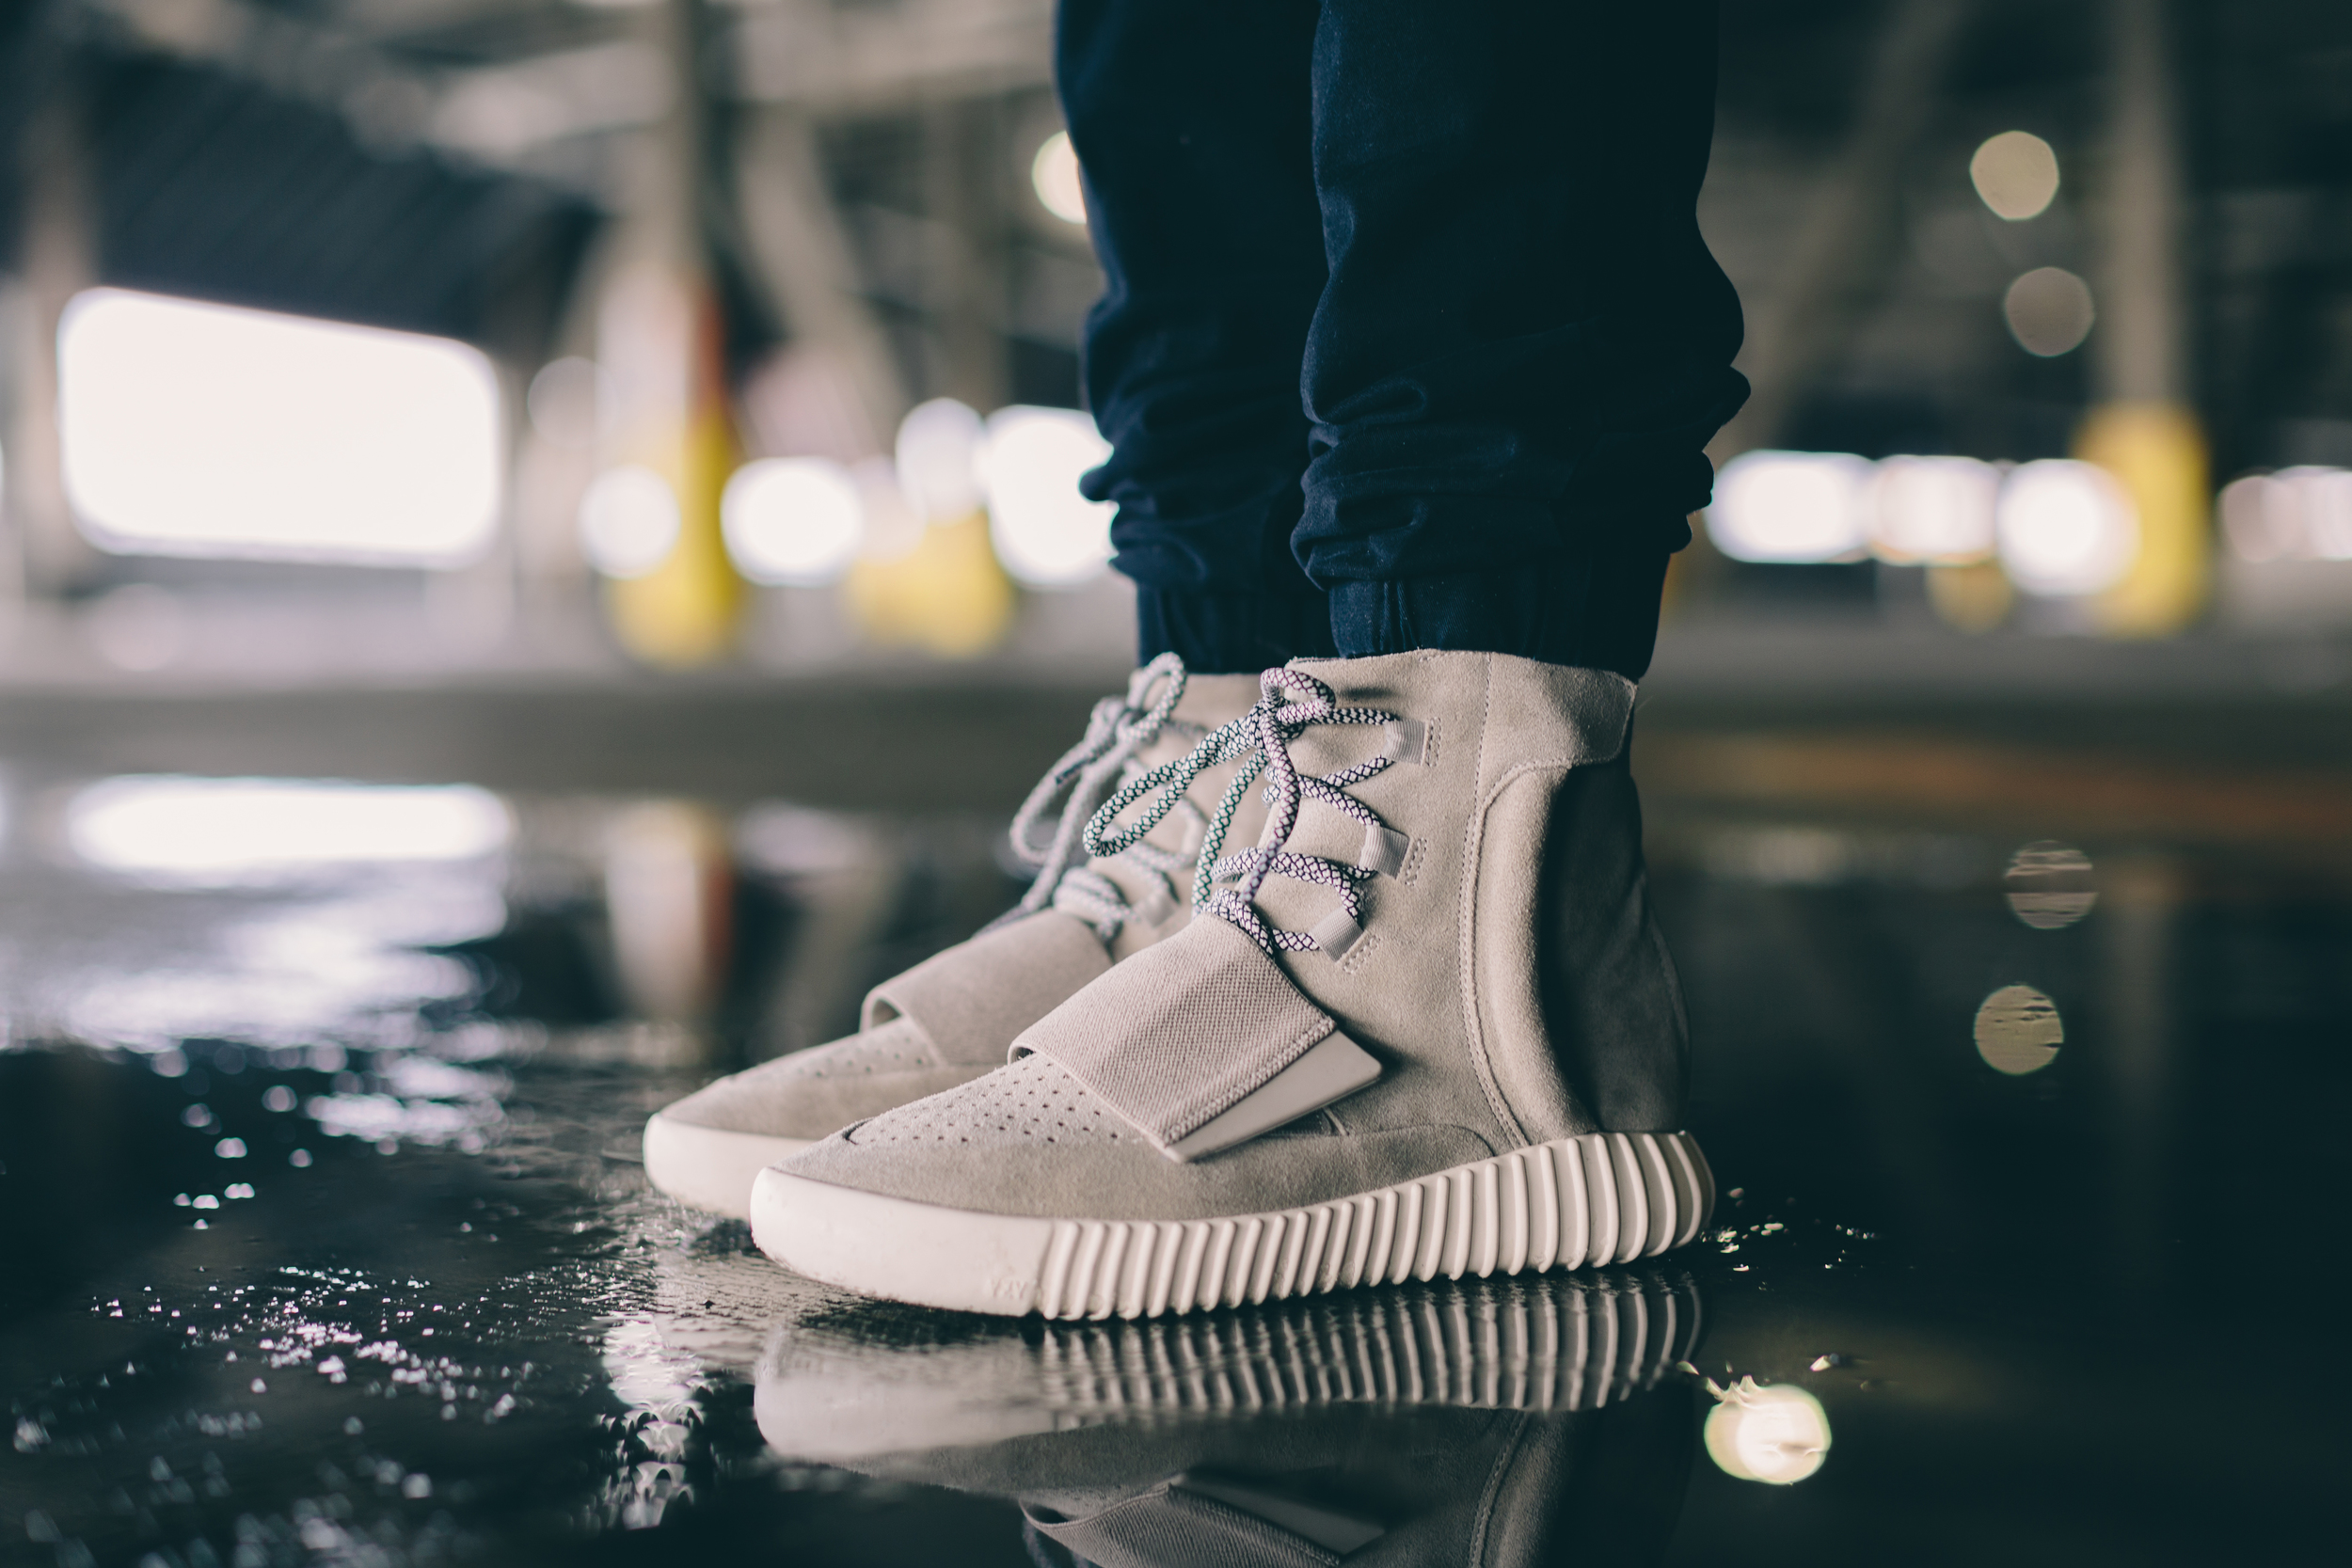 yeezy 750 size guide